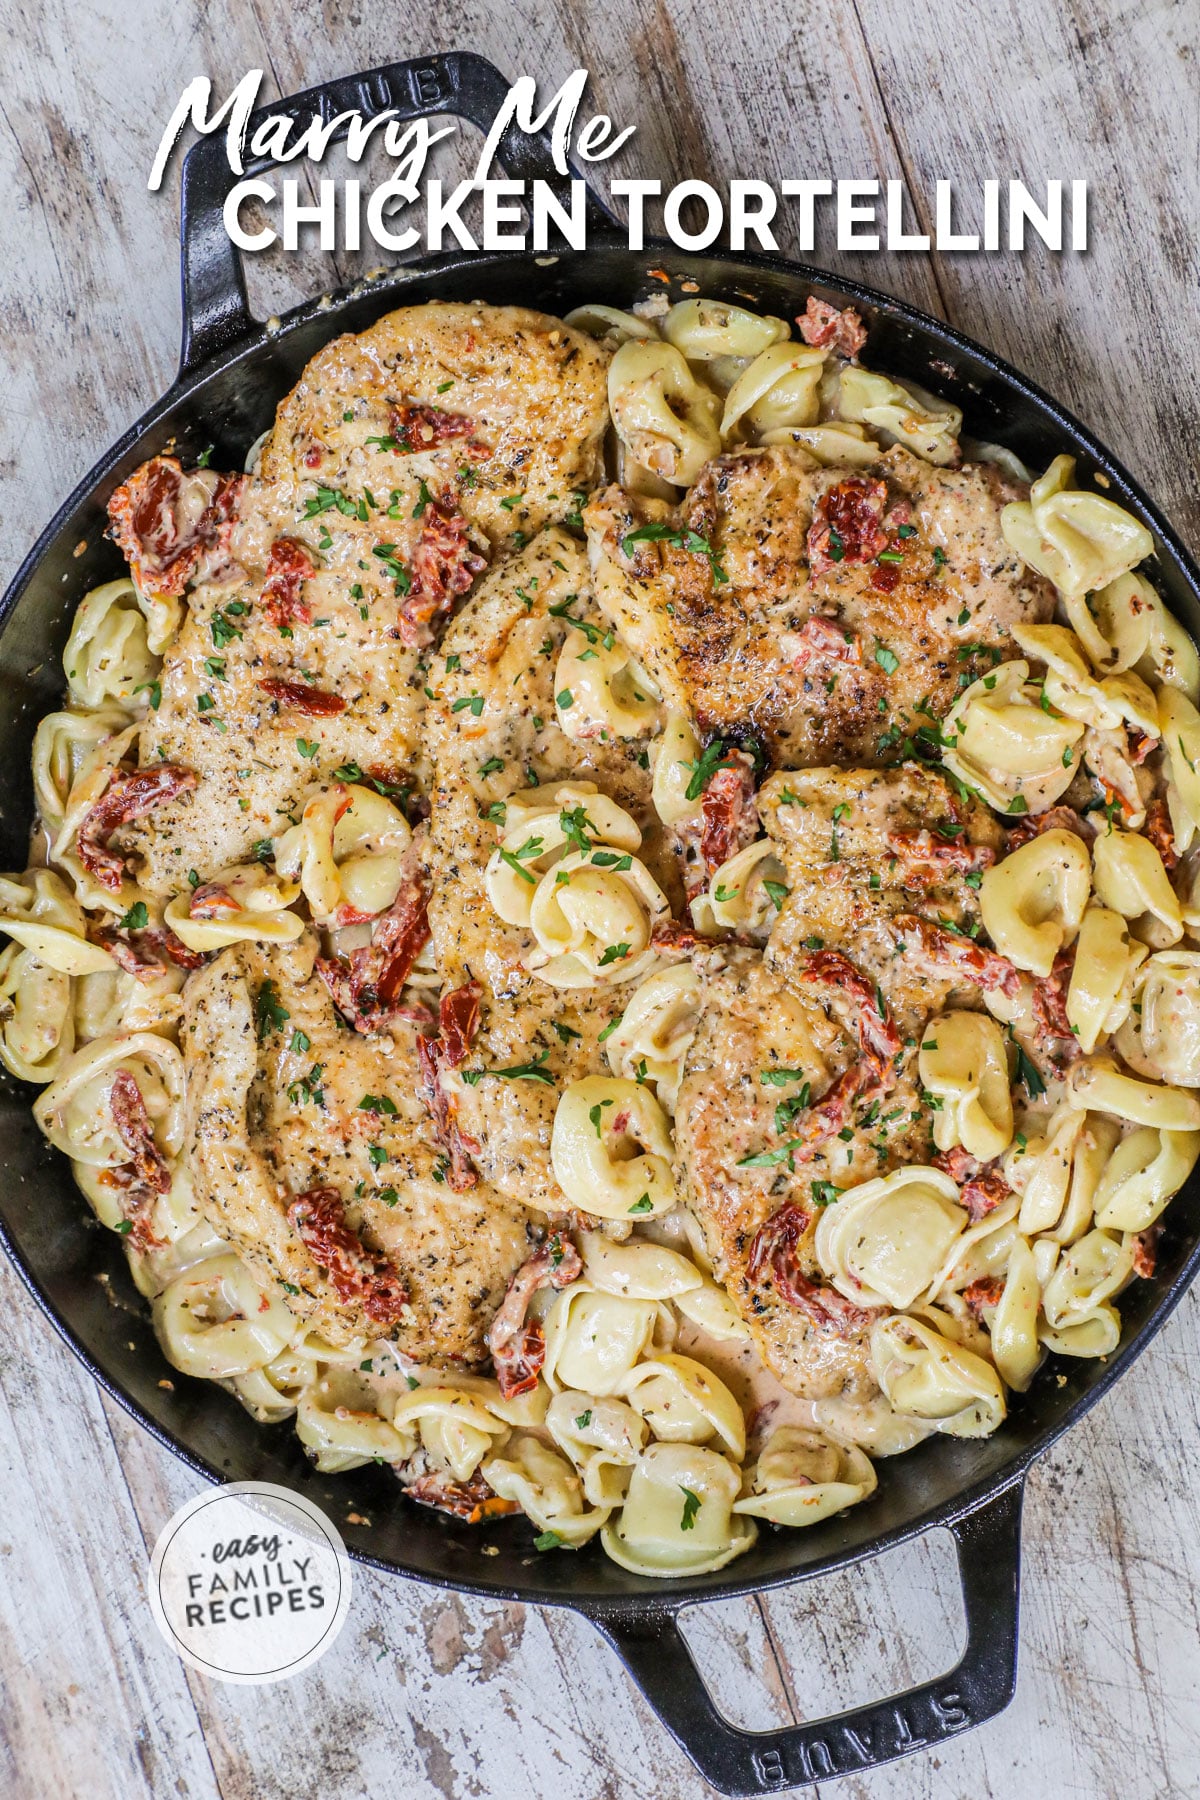 Overhead view of marry me chicken tortellini in a cast iron skillet